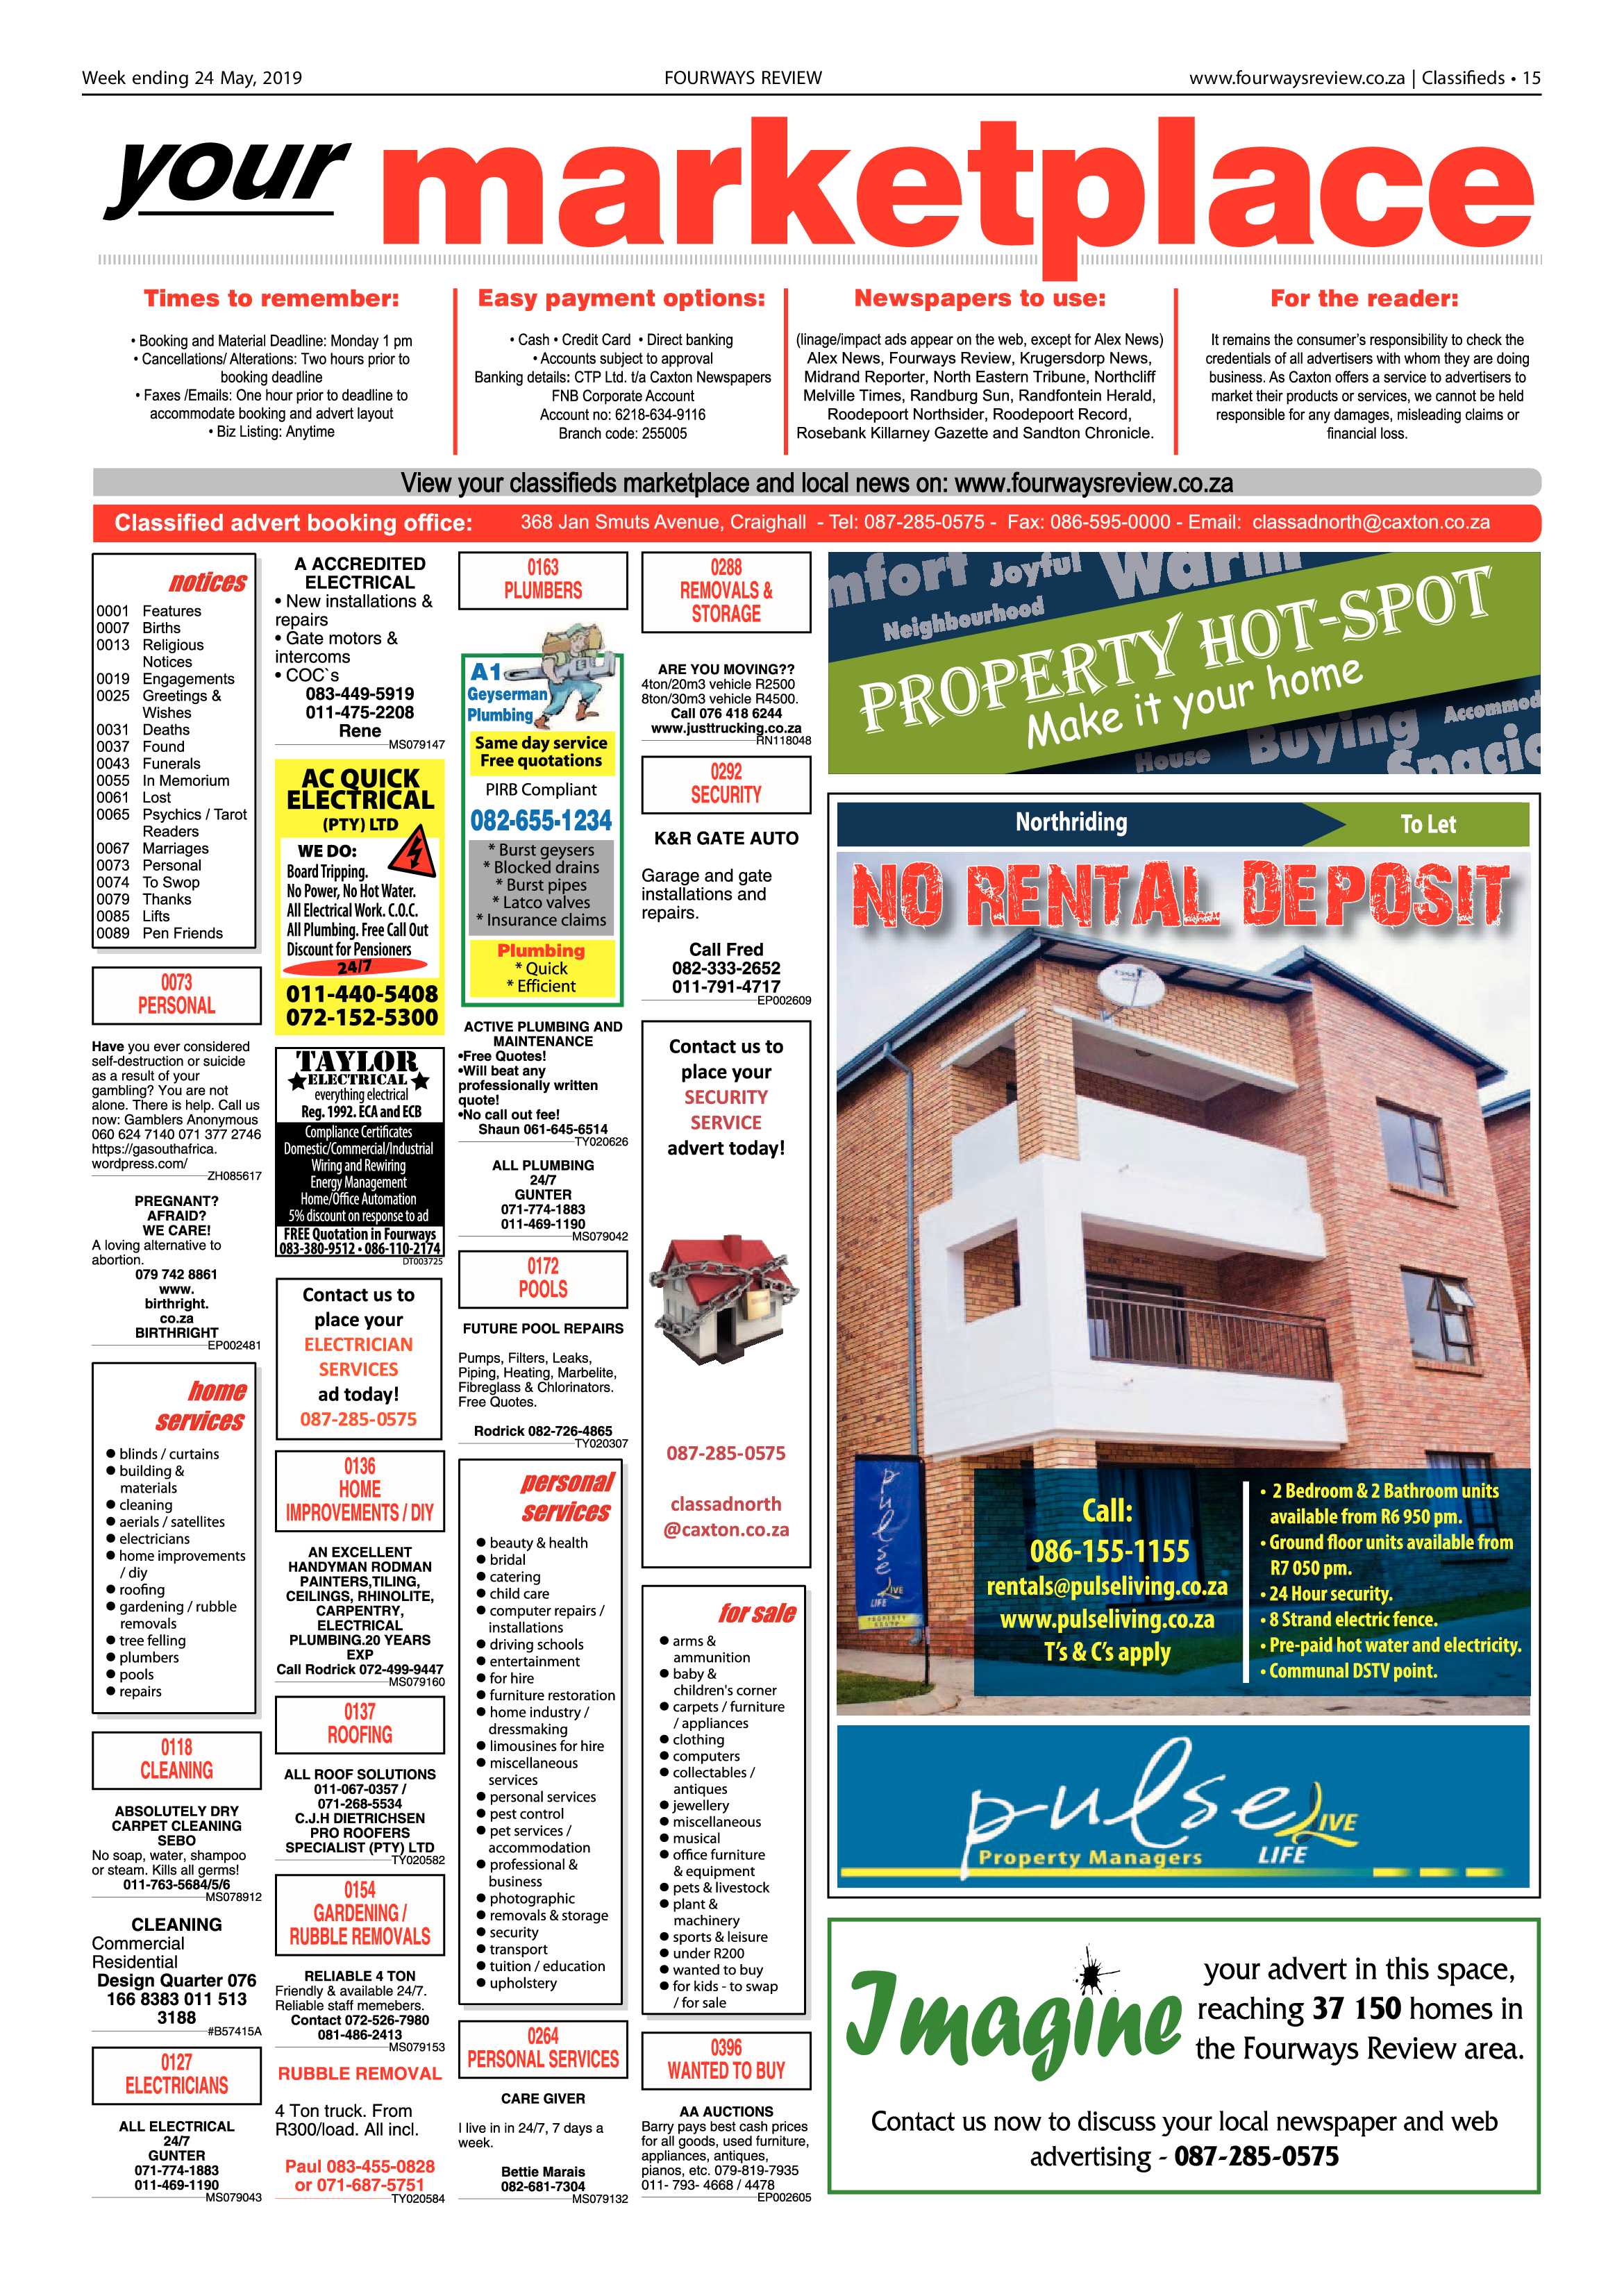 Fourways Review 24 May, 2019 page 15